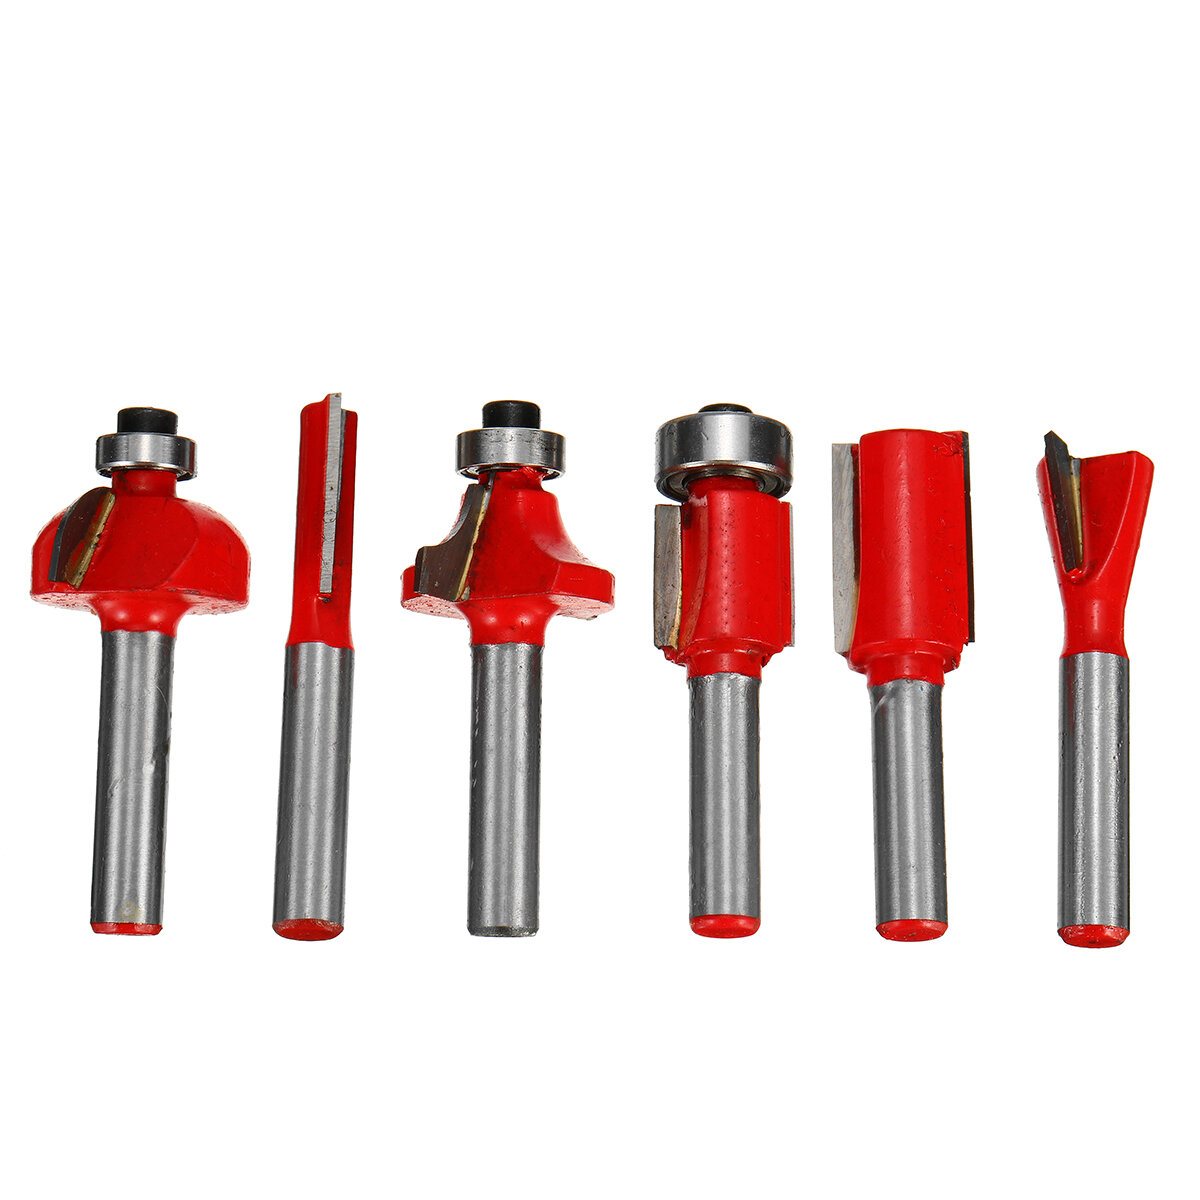 

6pcs 1/4 Inch Shank Router Bit Set Wood Cutter Carving Cutting Trimming Tool